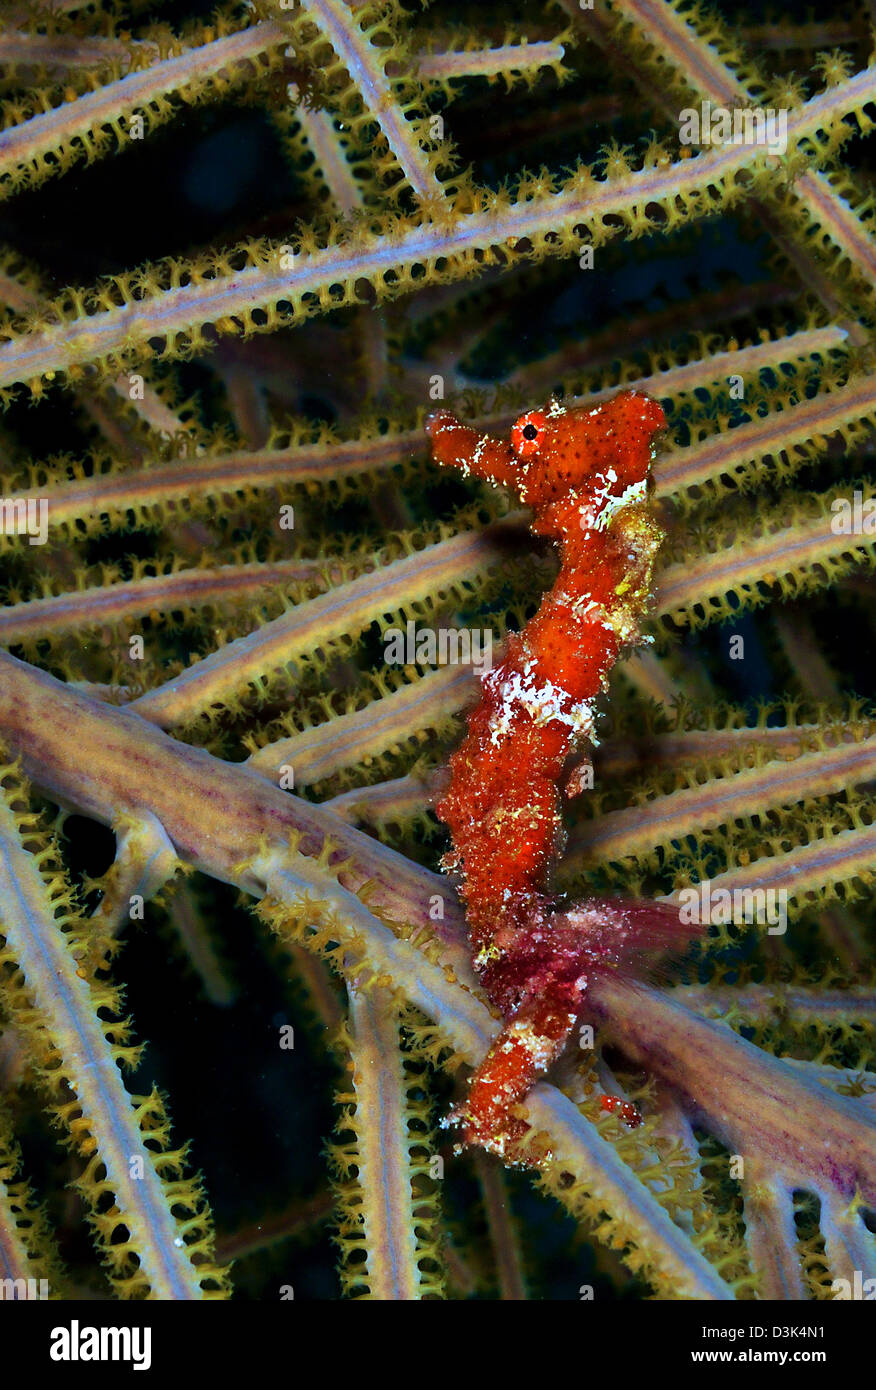 Red Seahorse on Caribbean reef. Stock Photo